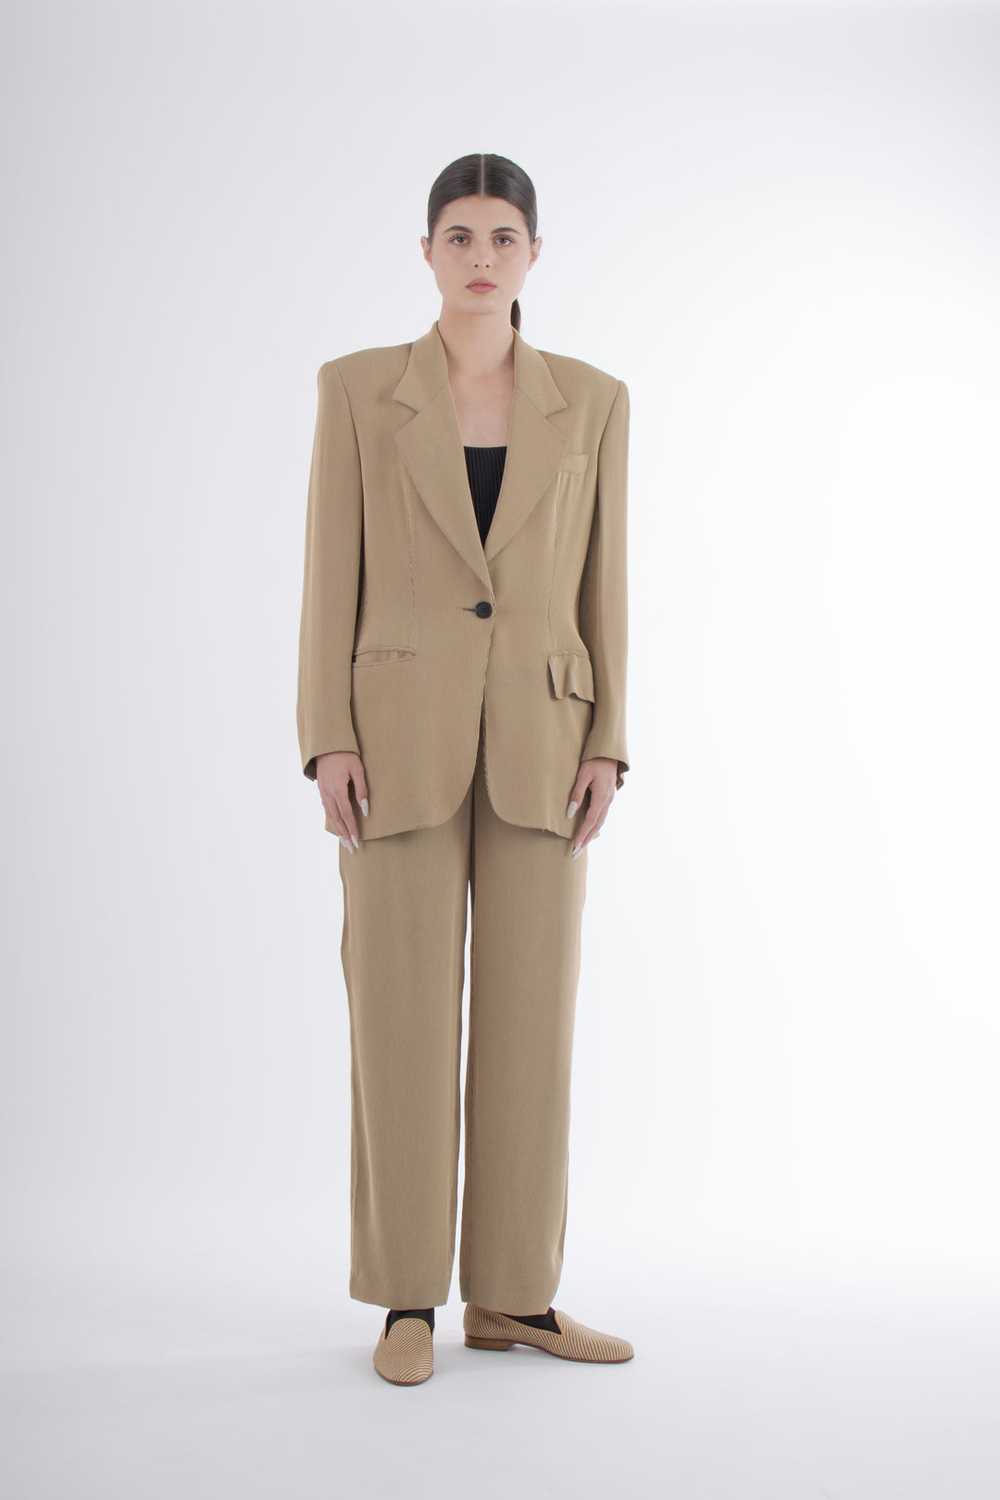 1990's Gucci by Tom Ford Striped Suit - image 2